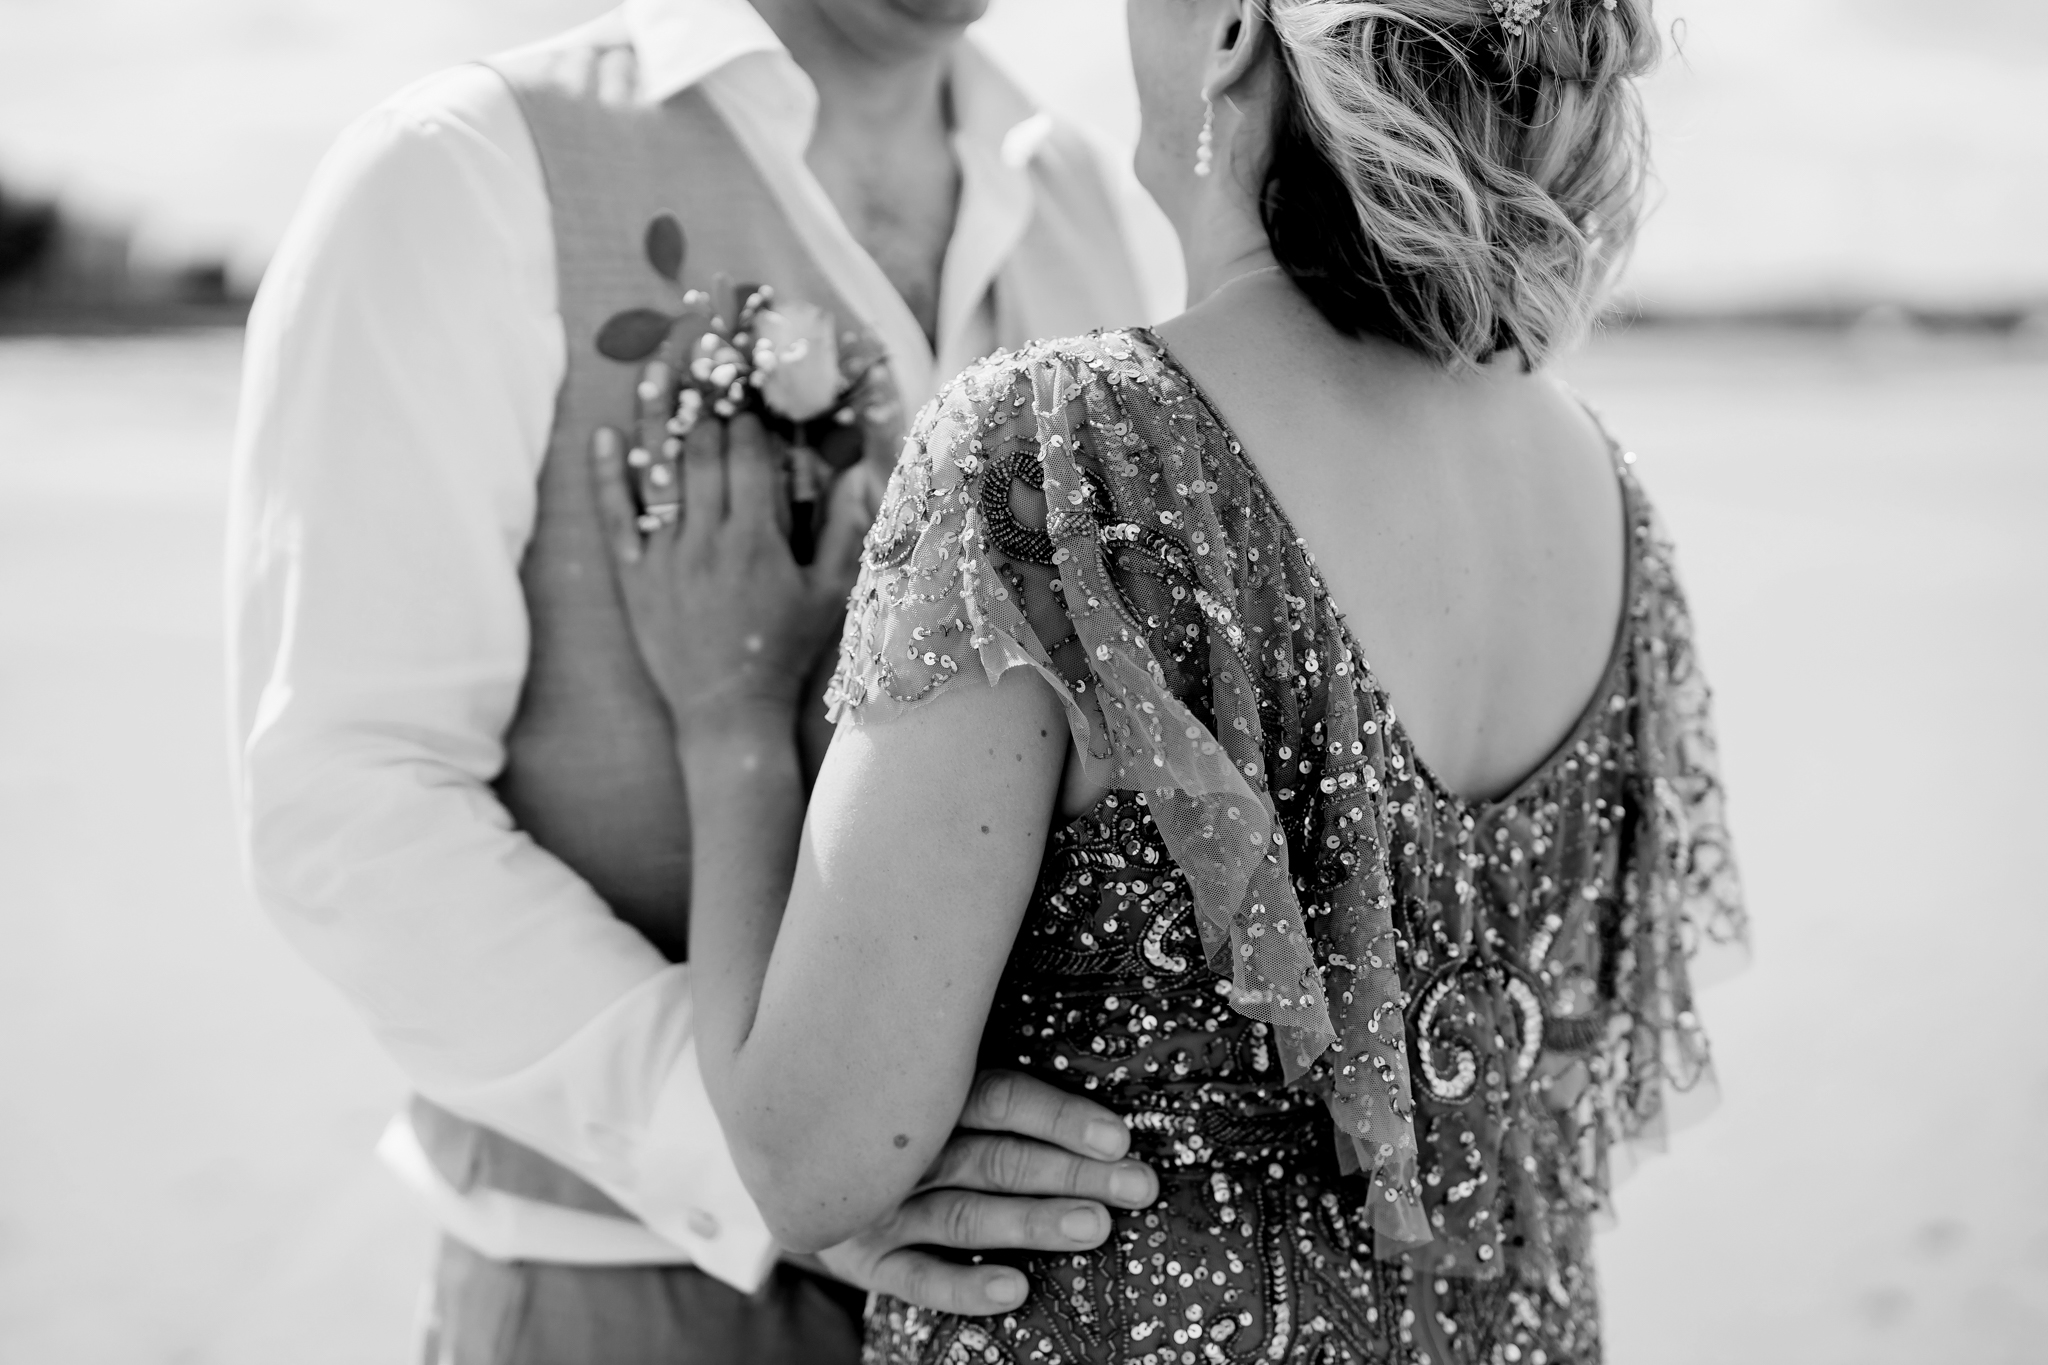 A couple standing on a beach wearing a sparkly dress and a suit in monochrome